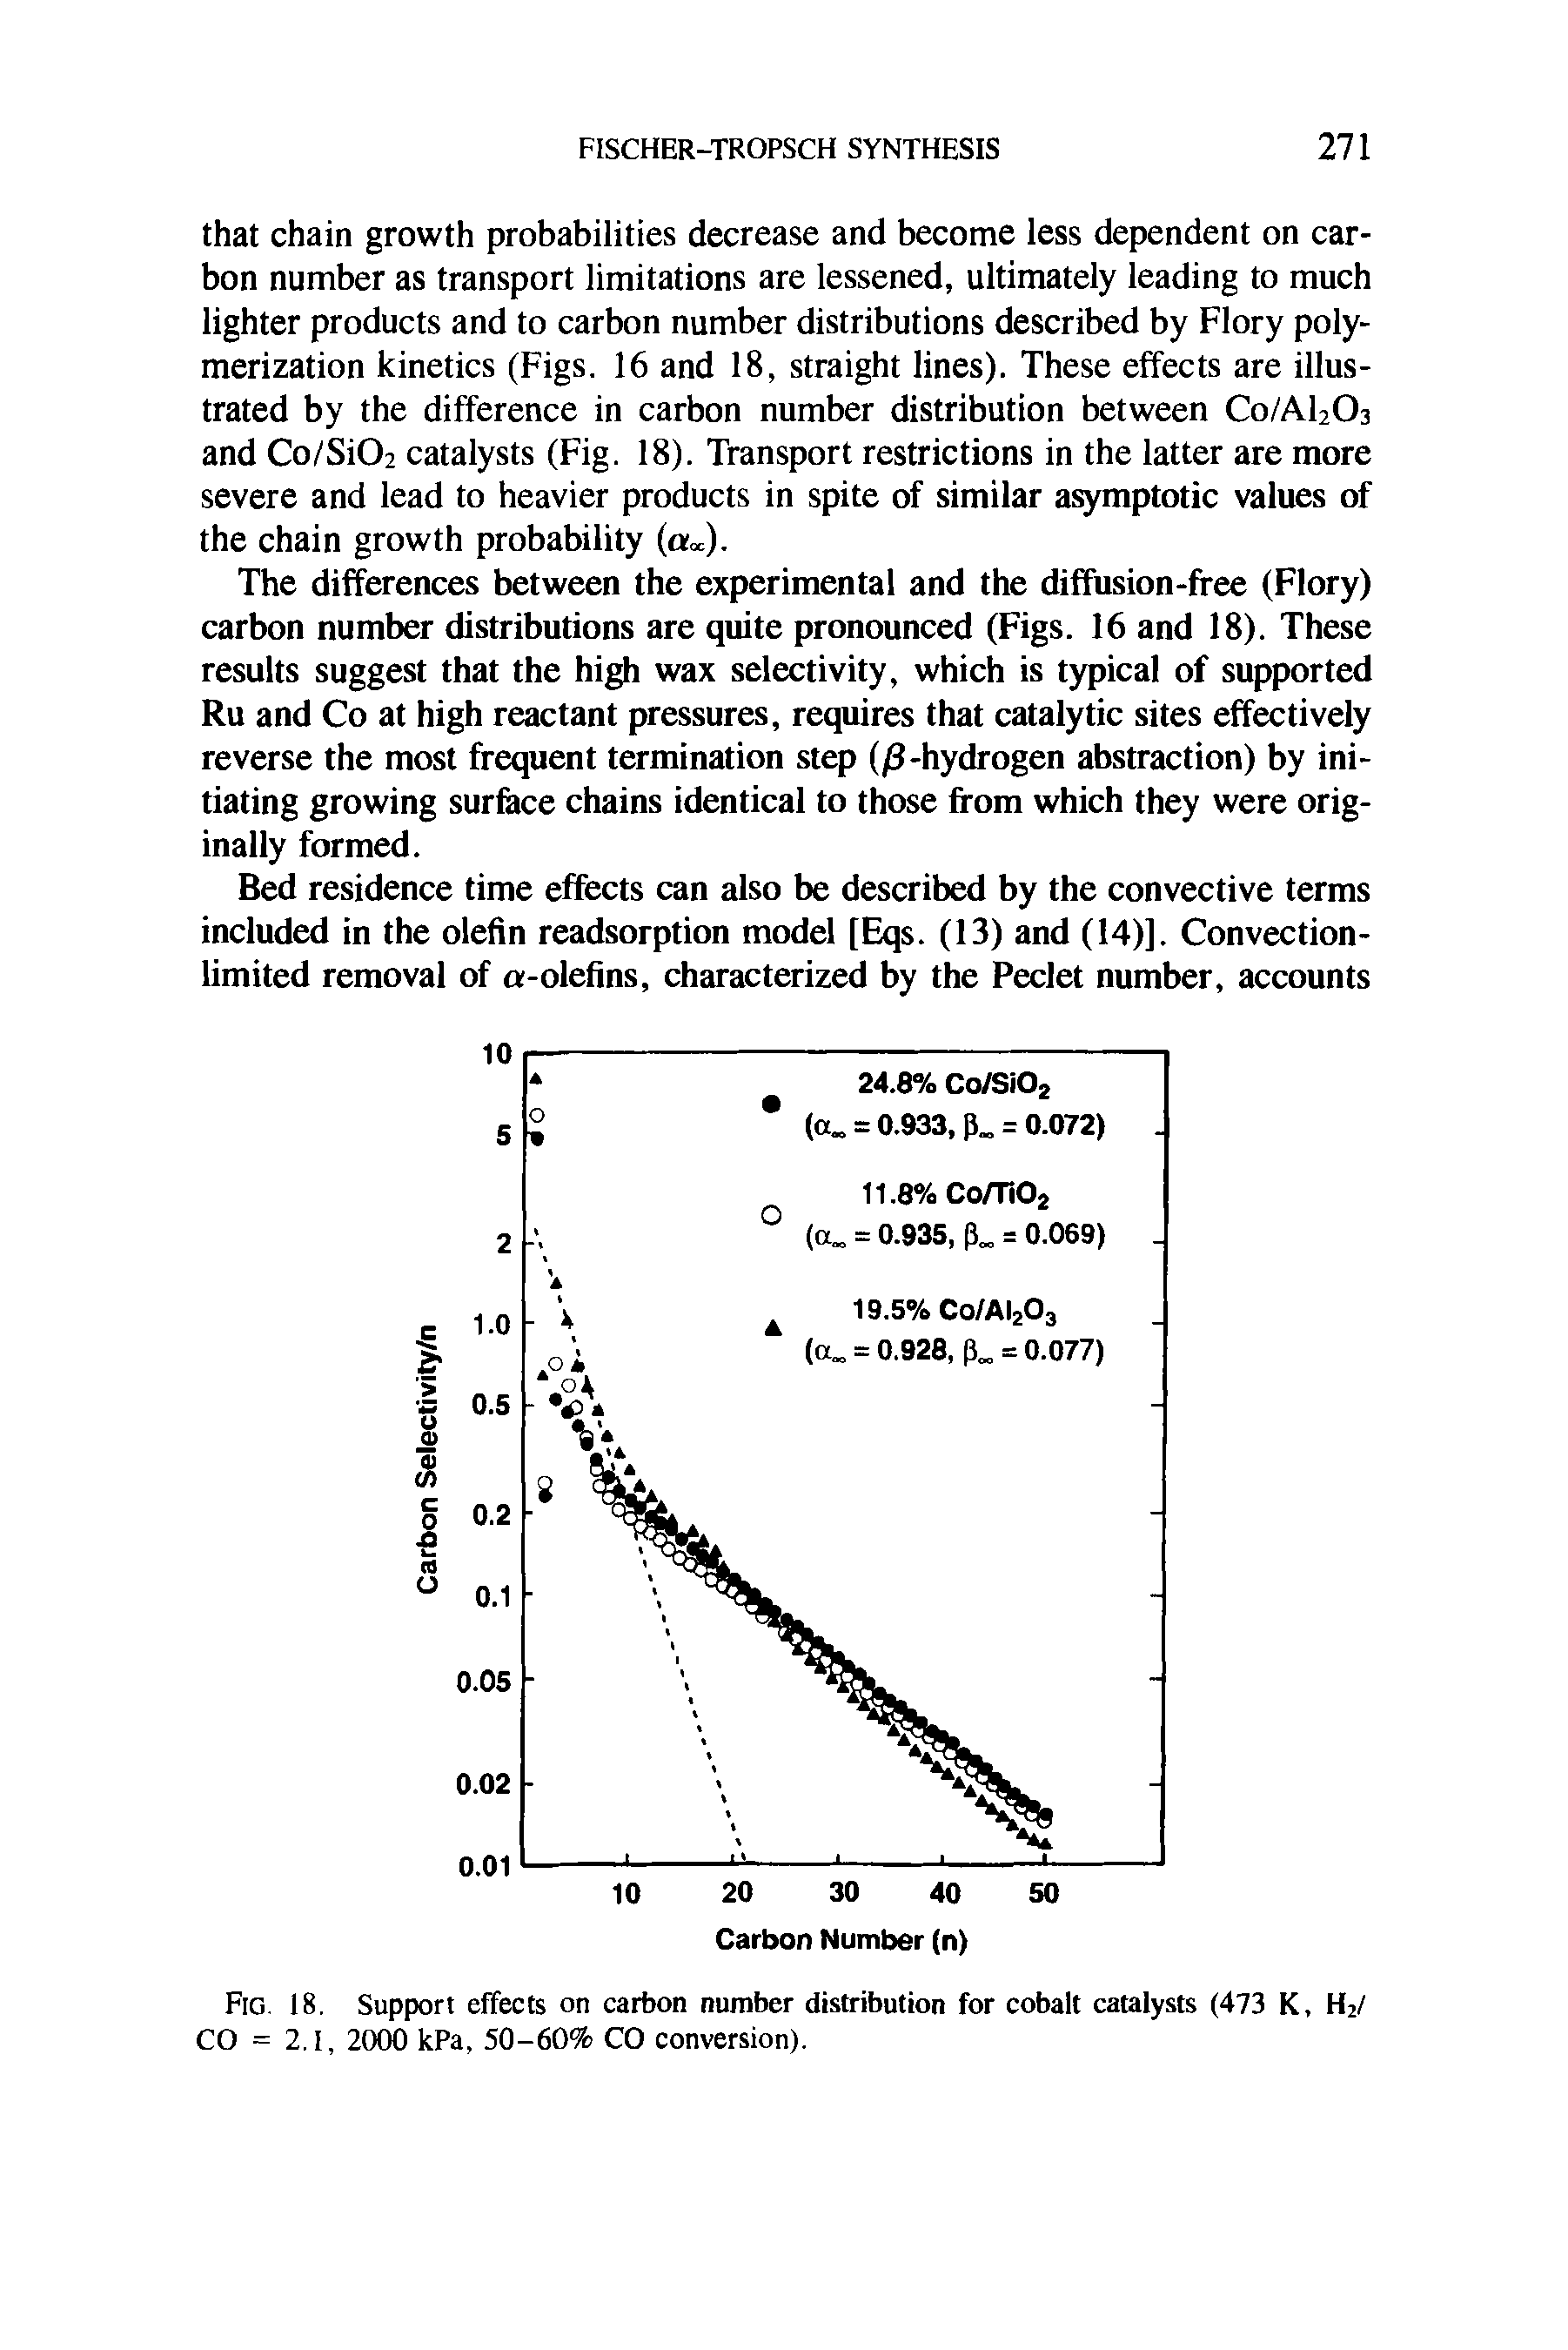 Fig. 18, Support effects on carbon number distribution for cobalt catalysts (473 K, H2/ CO = 2,1, 2000 kPa, 50-60% CO conversion).